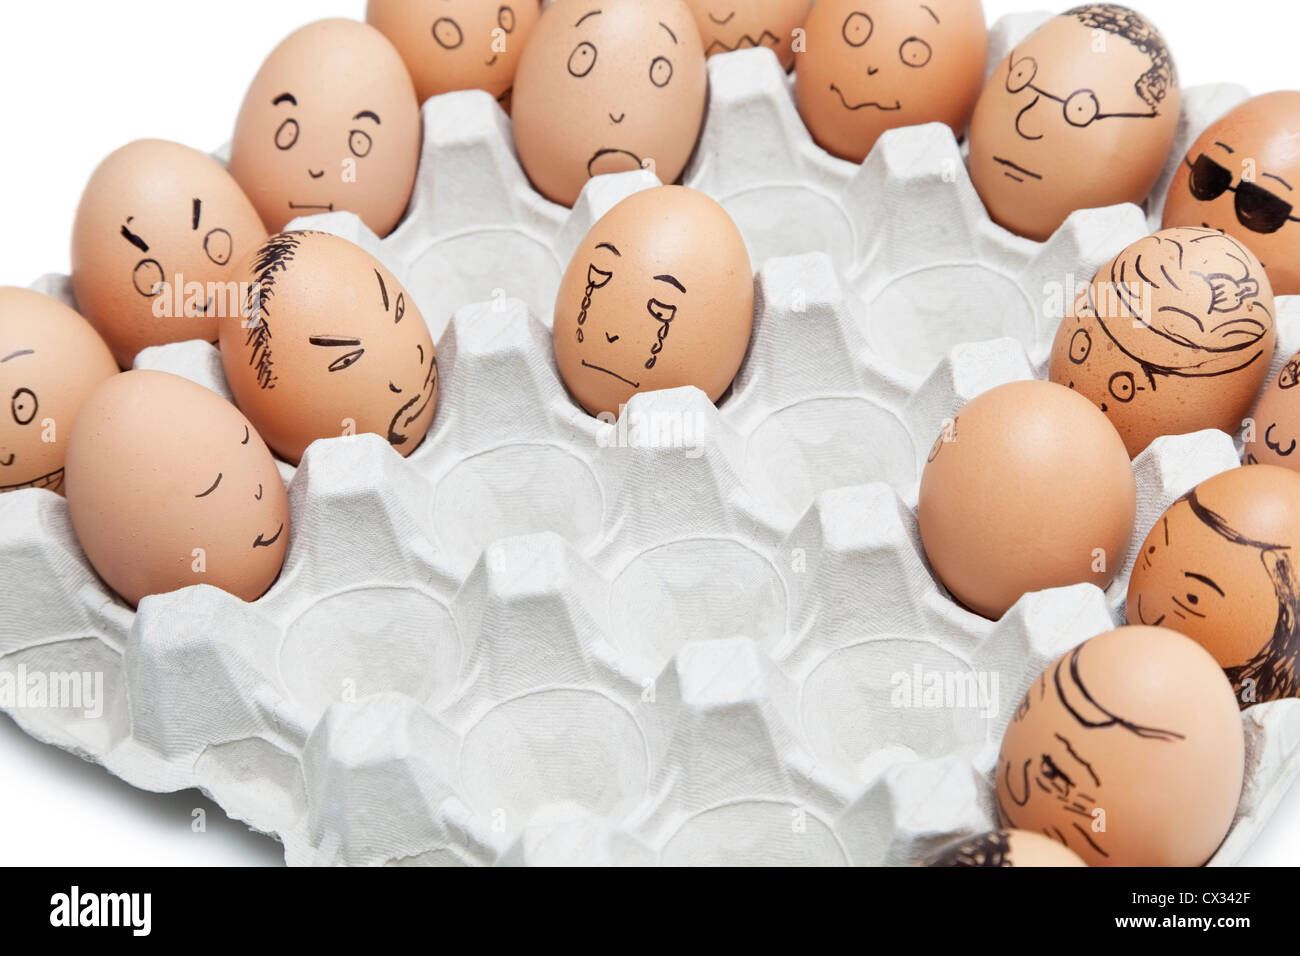 Variety of facial expressions painted on brown eggs arranged in carton Stock Photo